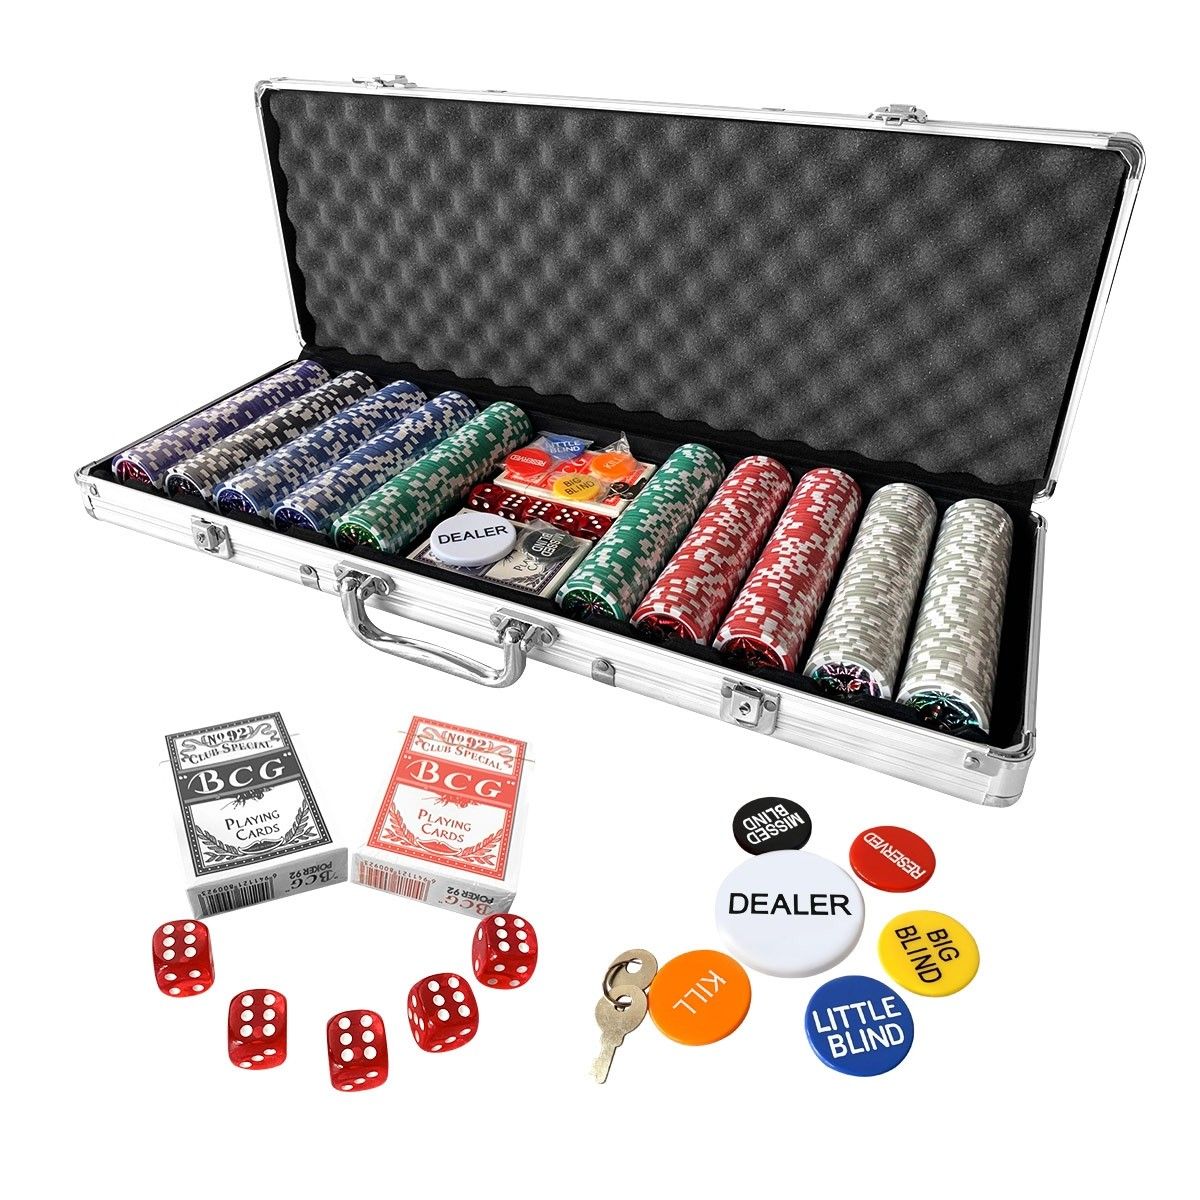 with Black Velvet Pouch Dealer, All in, Small Blind, Big Blind, Missed Blind, Reserved, Kill Cyber-Deals Texas Hold'em Poker 7pc Button Set 